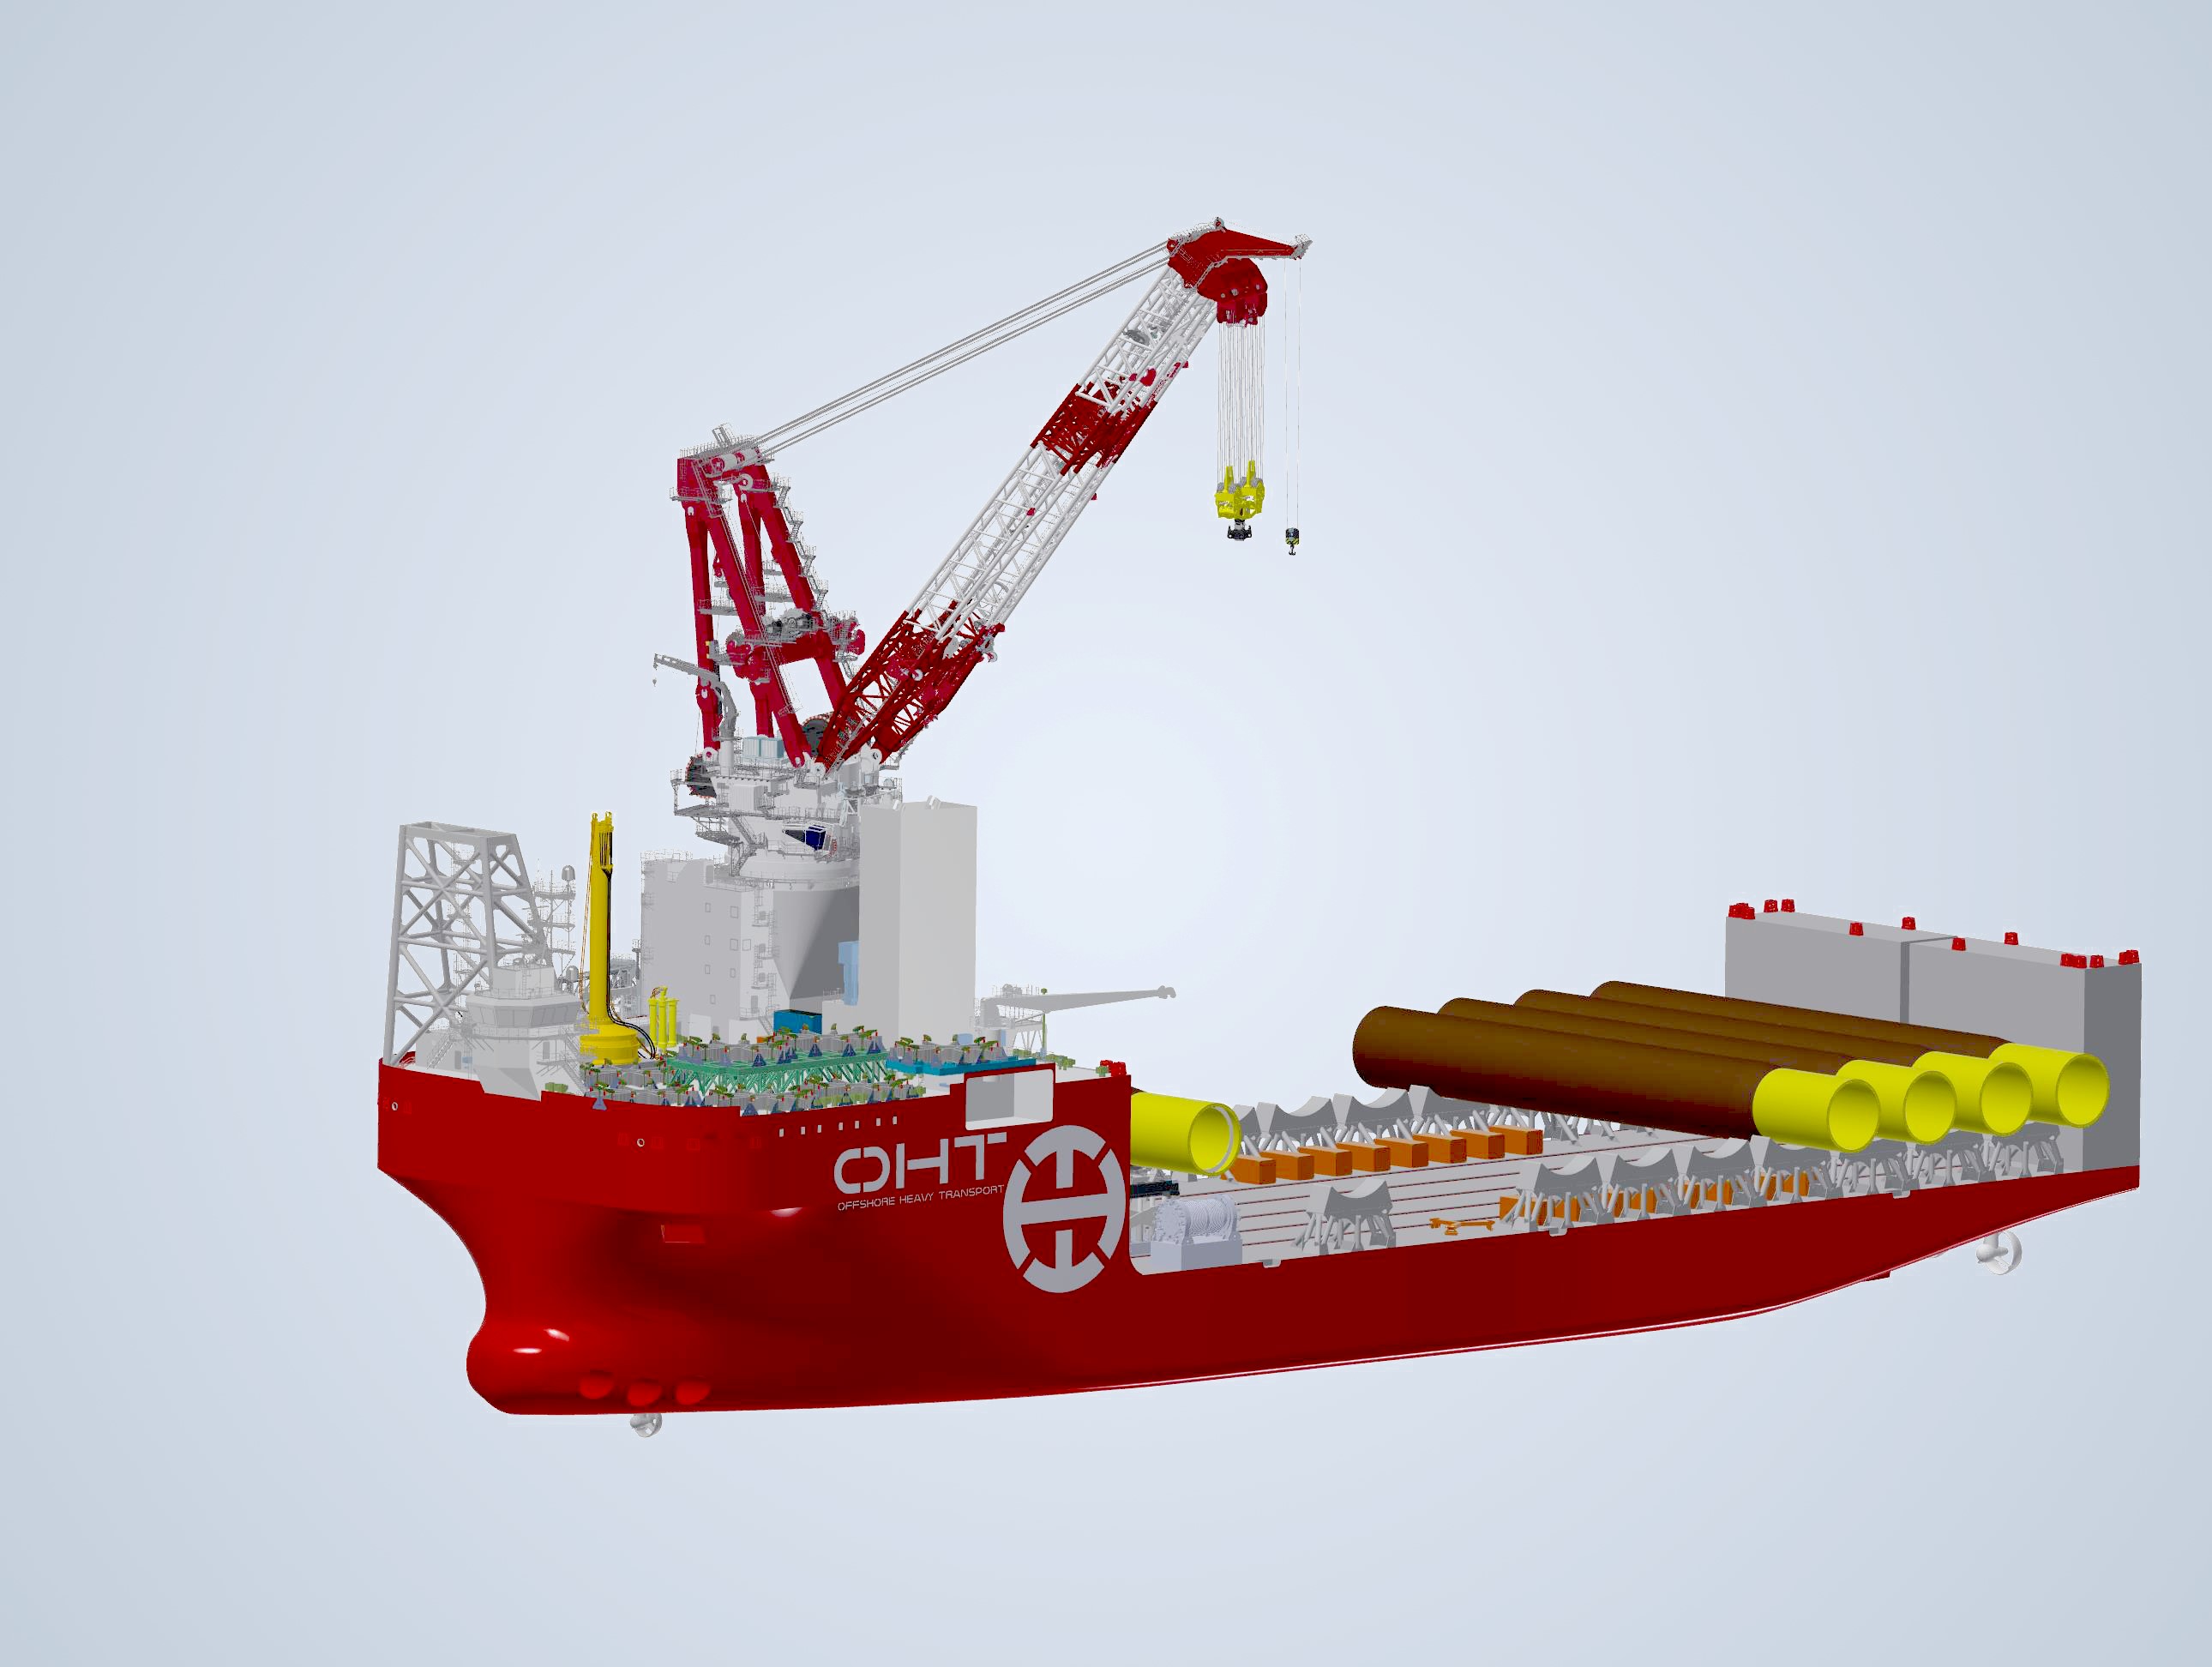 An image of the OHT Alfa Lift installation vessel